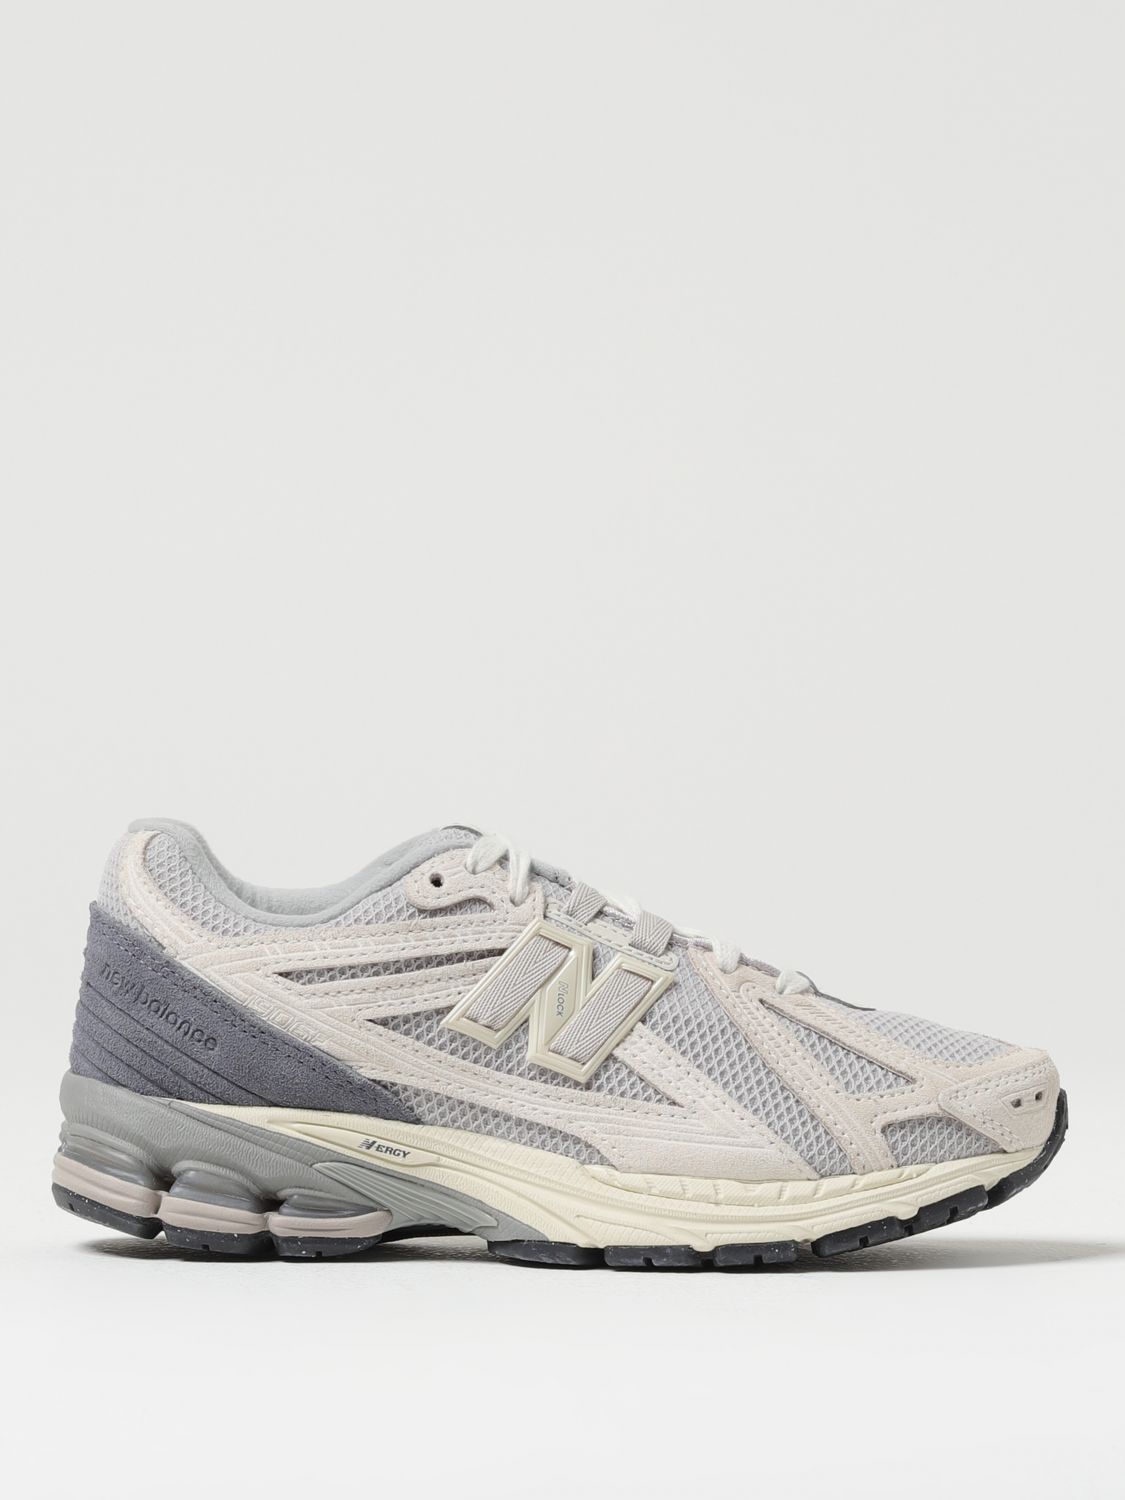 sneakers new balance woman colour grey